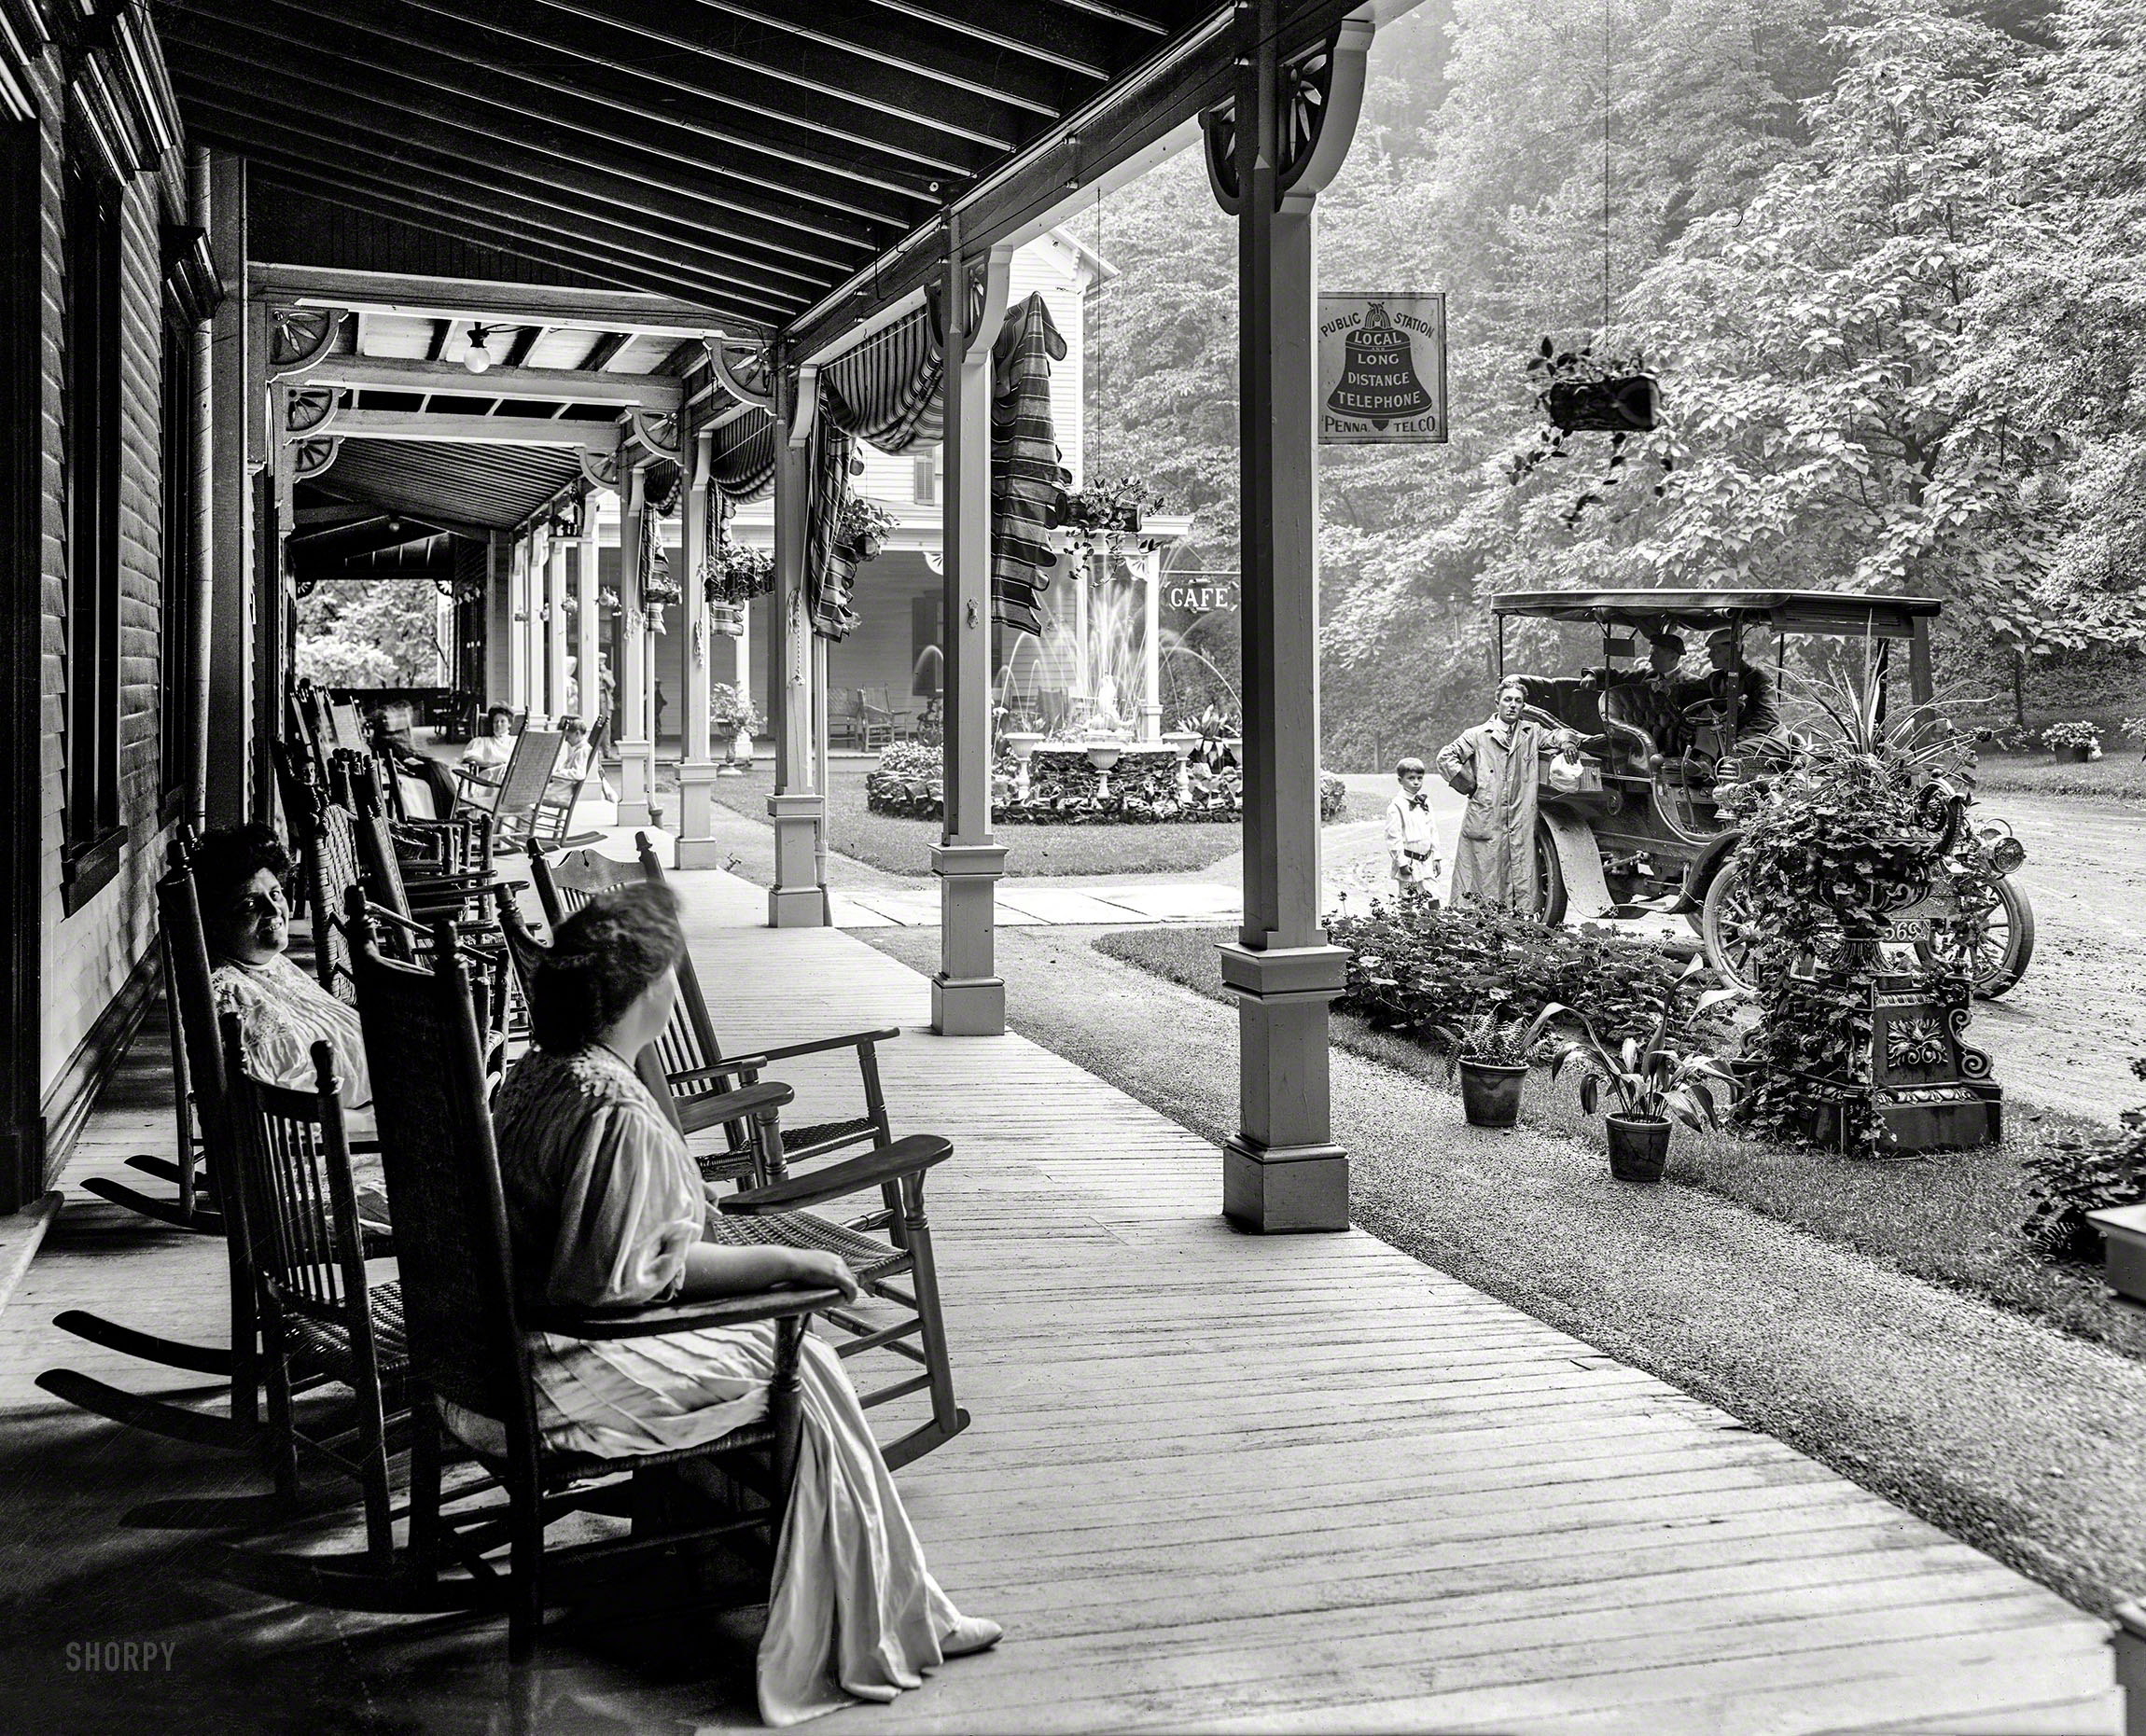 Circa 1905. "Front piazza of Kittatinny House, Delaware Water Gap, Pennsylvania." An up-to-date inn catering to the automobilist with such amenities as cafe and public telephone. 8x10 inch glass negative. View full size.